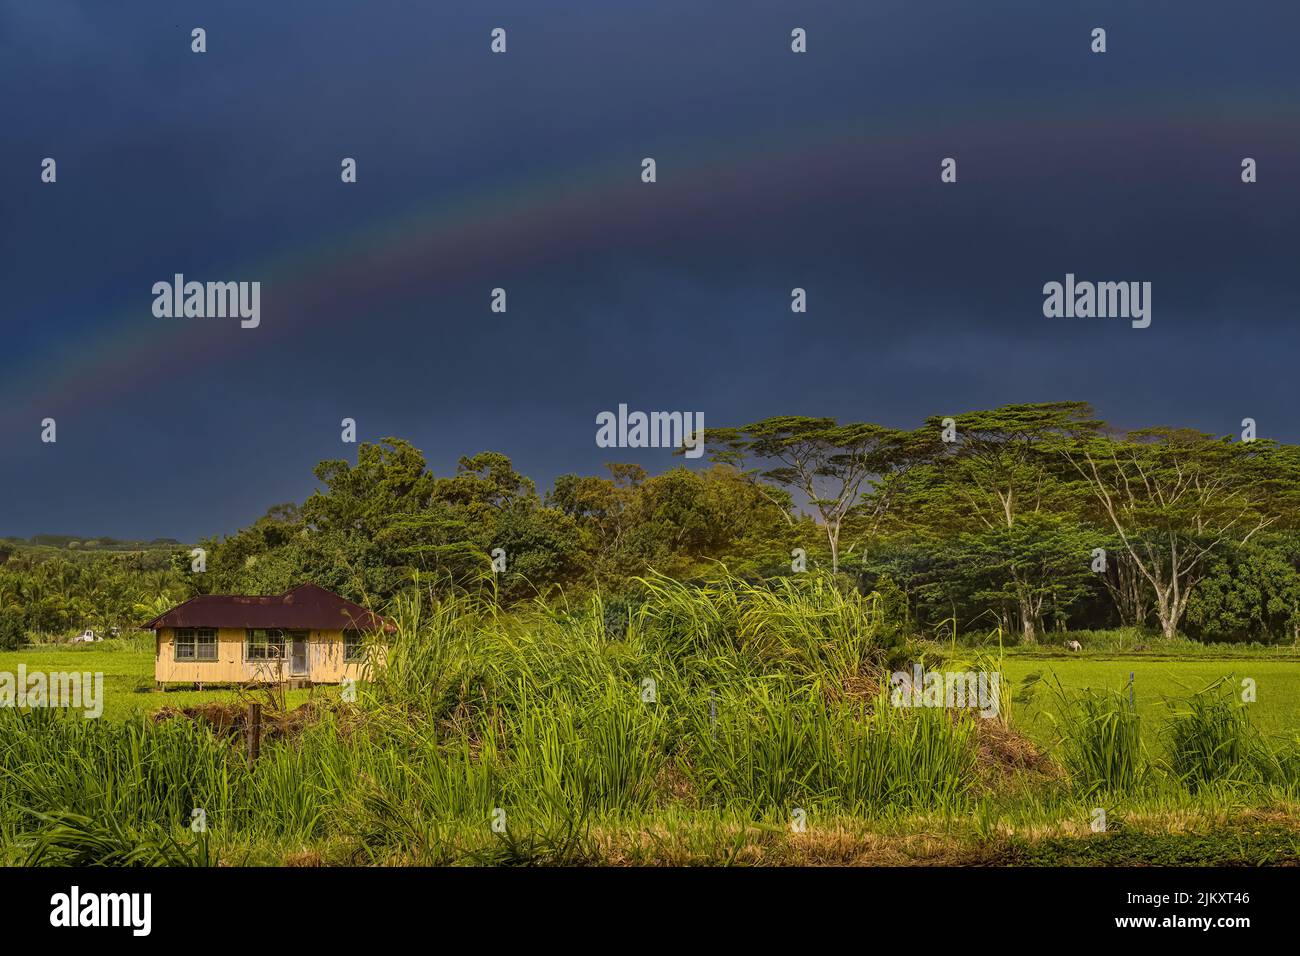 A RAINBOW BREAKING THROUGH DARK CLOUDS OVER A LUSH FIELD WITH A SMALL STRUCTURE ON KAUAI HAWAII Stock Photo